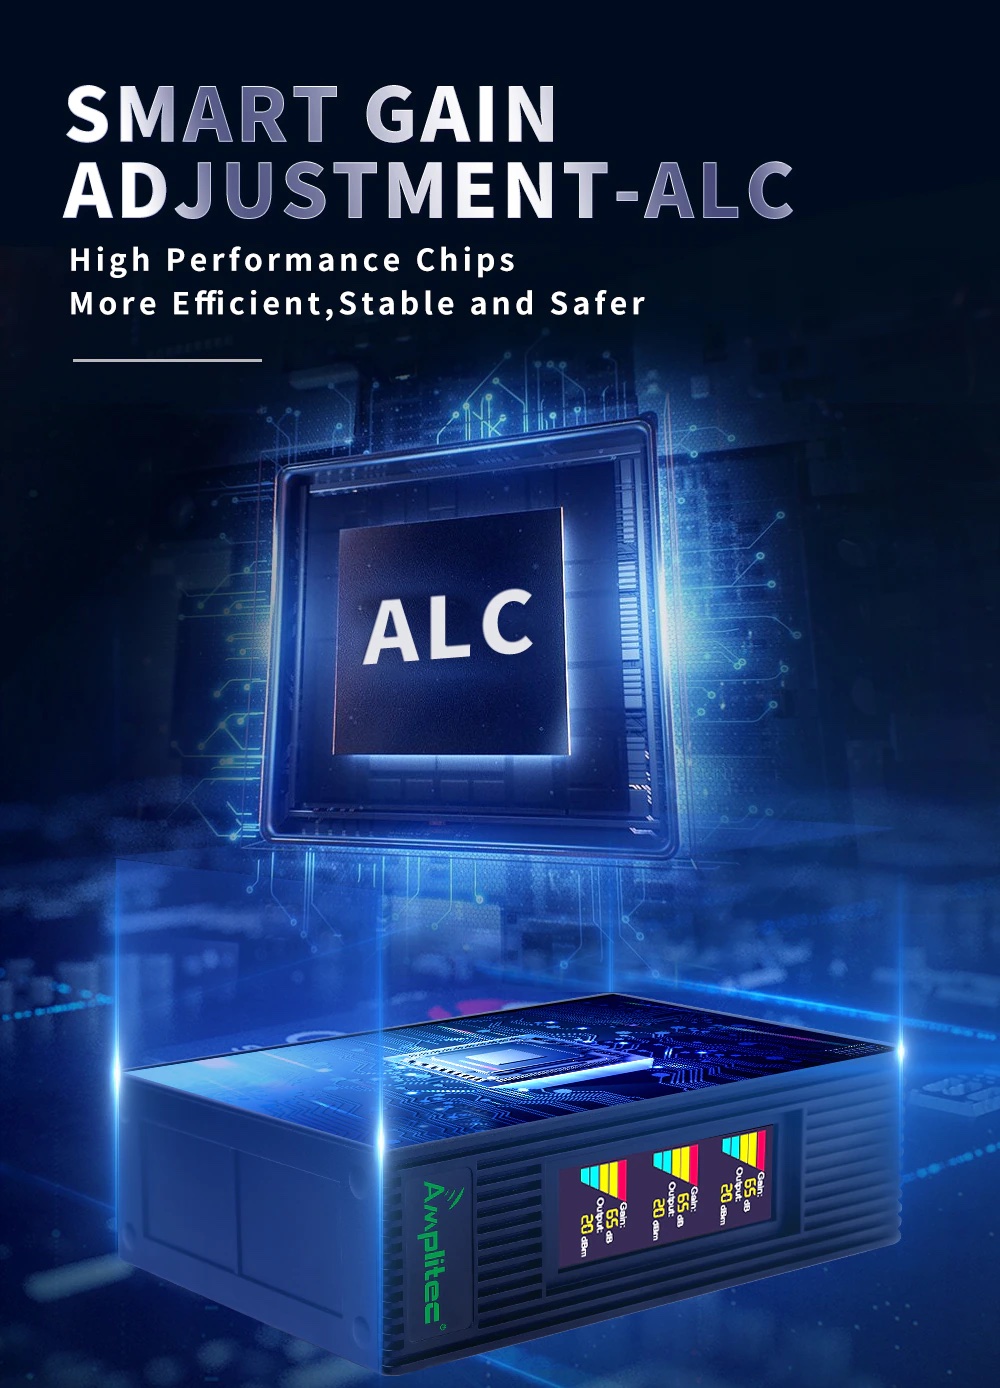 SMART GAIN ADJUSTMENT-ALC High Performance Chips More Efficient, Stable and Safer